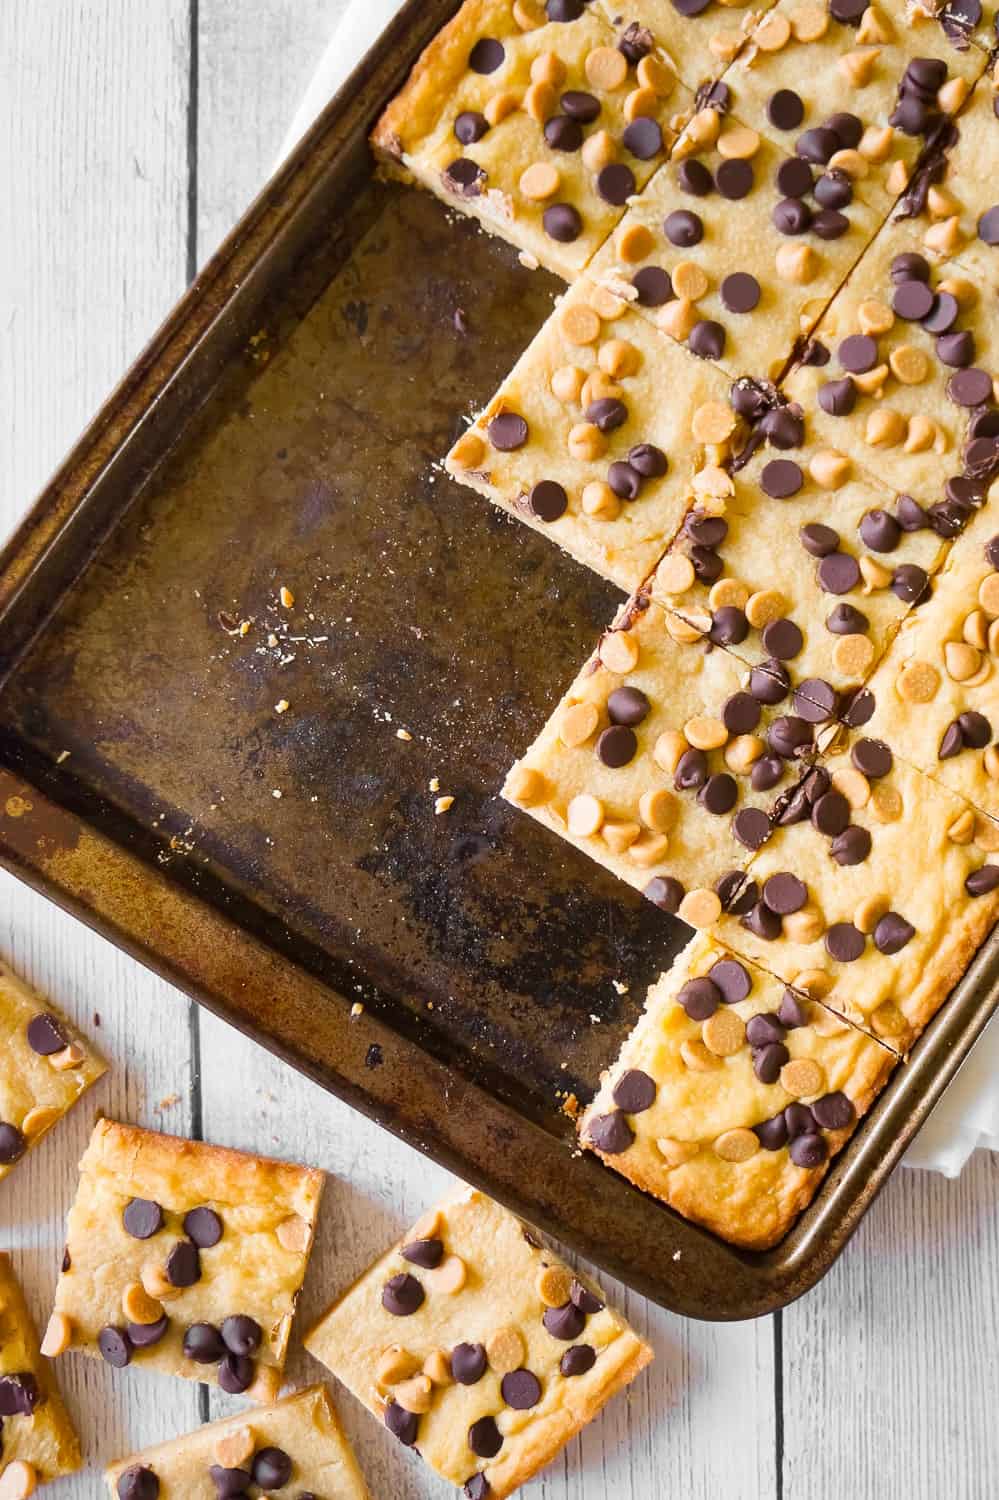 Peanut Butter Banana Pudding Sugar Cookie Bars are an easy dessert recipe using Betty Crocker sugar cookie mix, banana instant pudding mix, Reese's peanut butter baking chips and semi sweet chocolate chips.